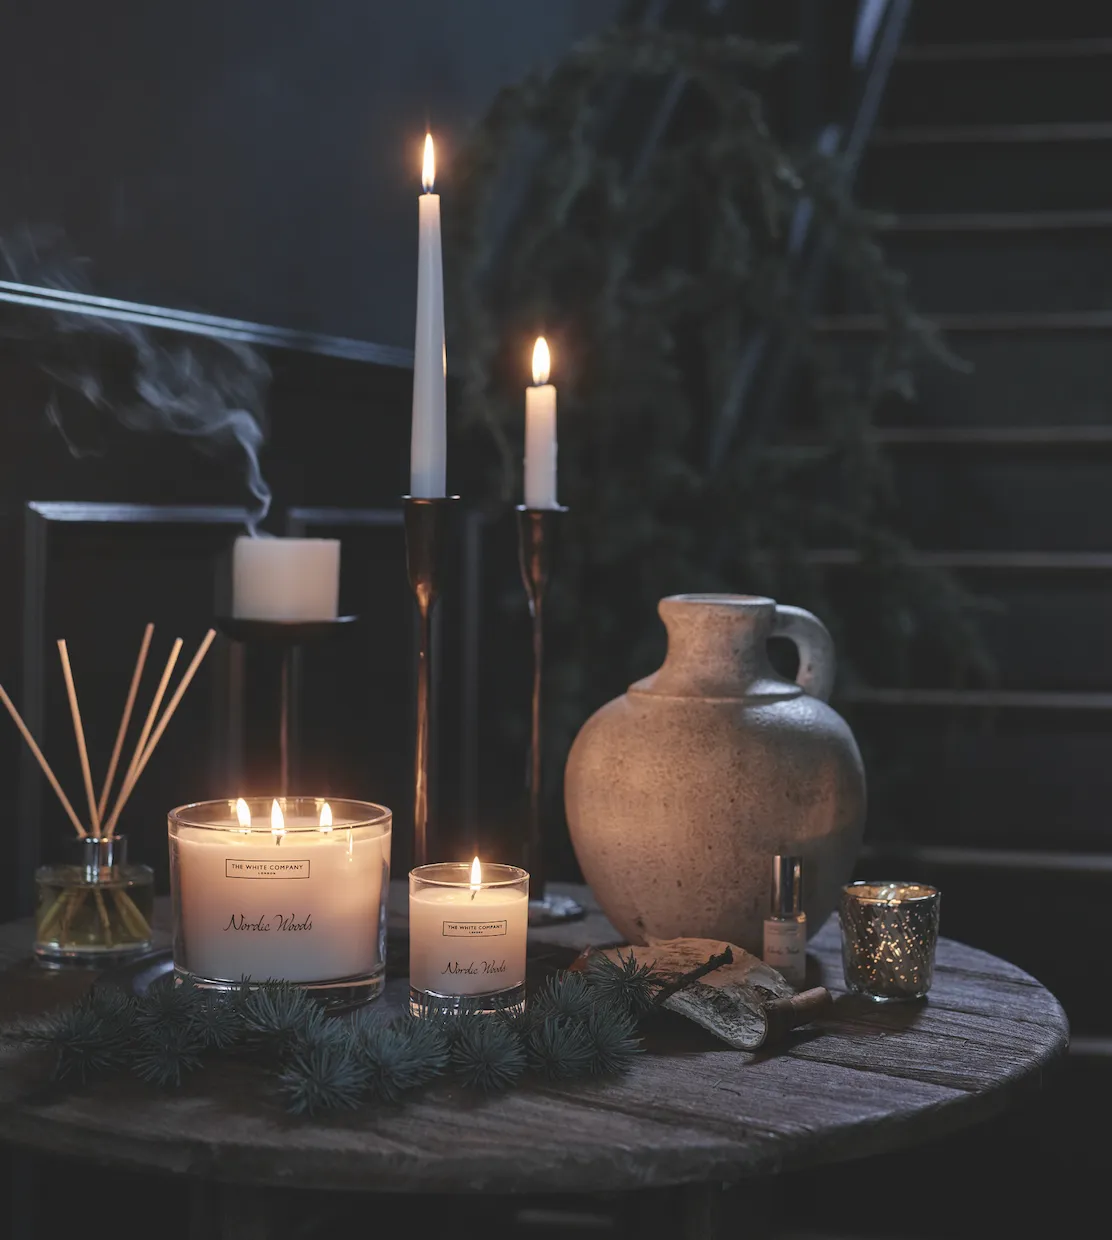 The Nordic Woods home fragrance collection is reminiscent of a frosty winter walk through a snow-covered forest with notes of eucalyptus, amber and birchwood Nordic Woods fragrance oil, £10, diffuser, £30, large candle, £65, signature candle, £22; Stanton forged Black pillar candle holder, £25; Stanton forged Black dinner candle holder, £30; Swirl mercury tea light holder, £6, all The White Company